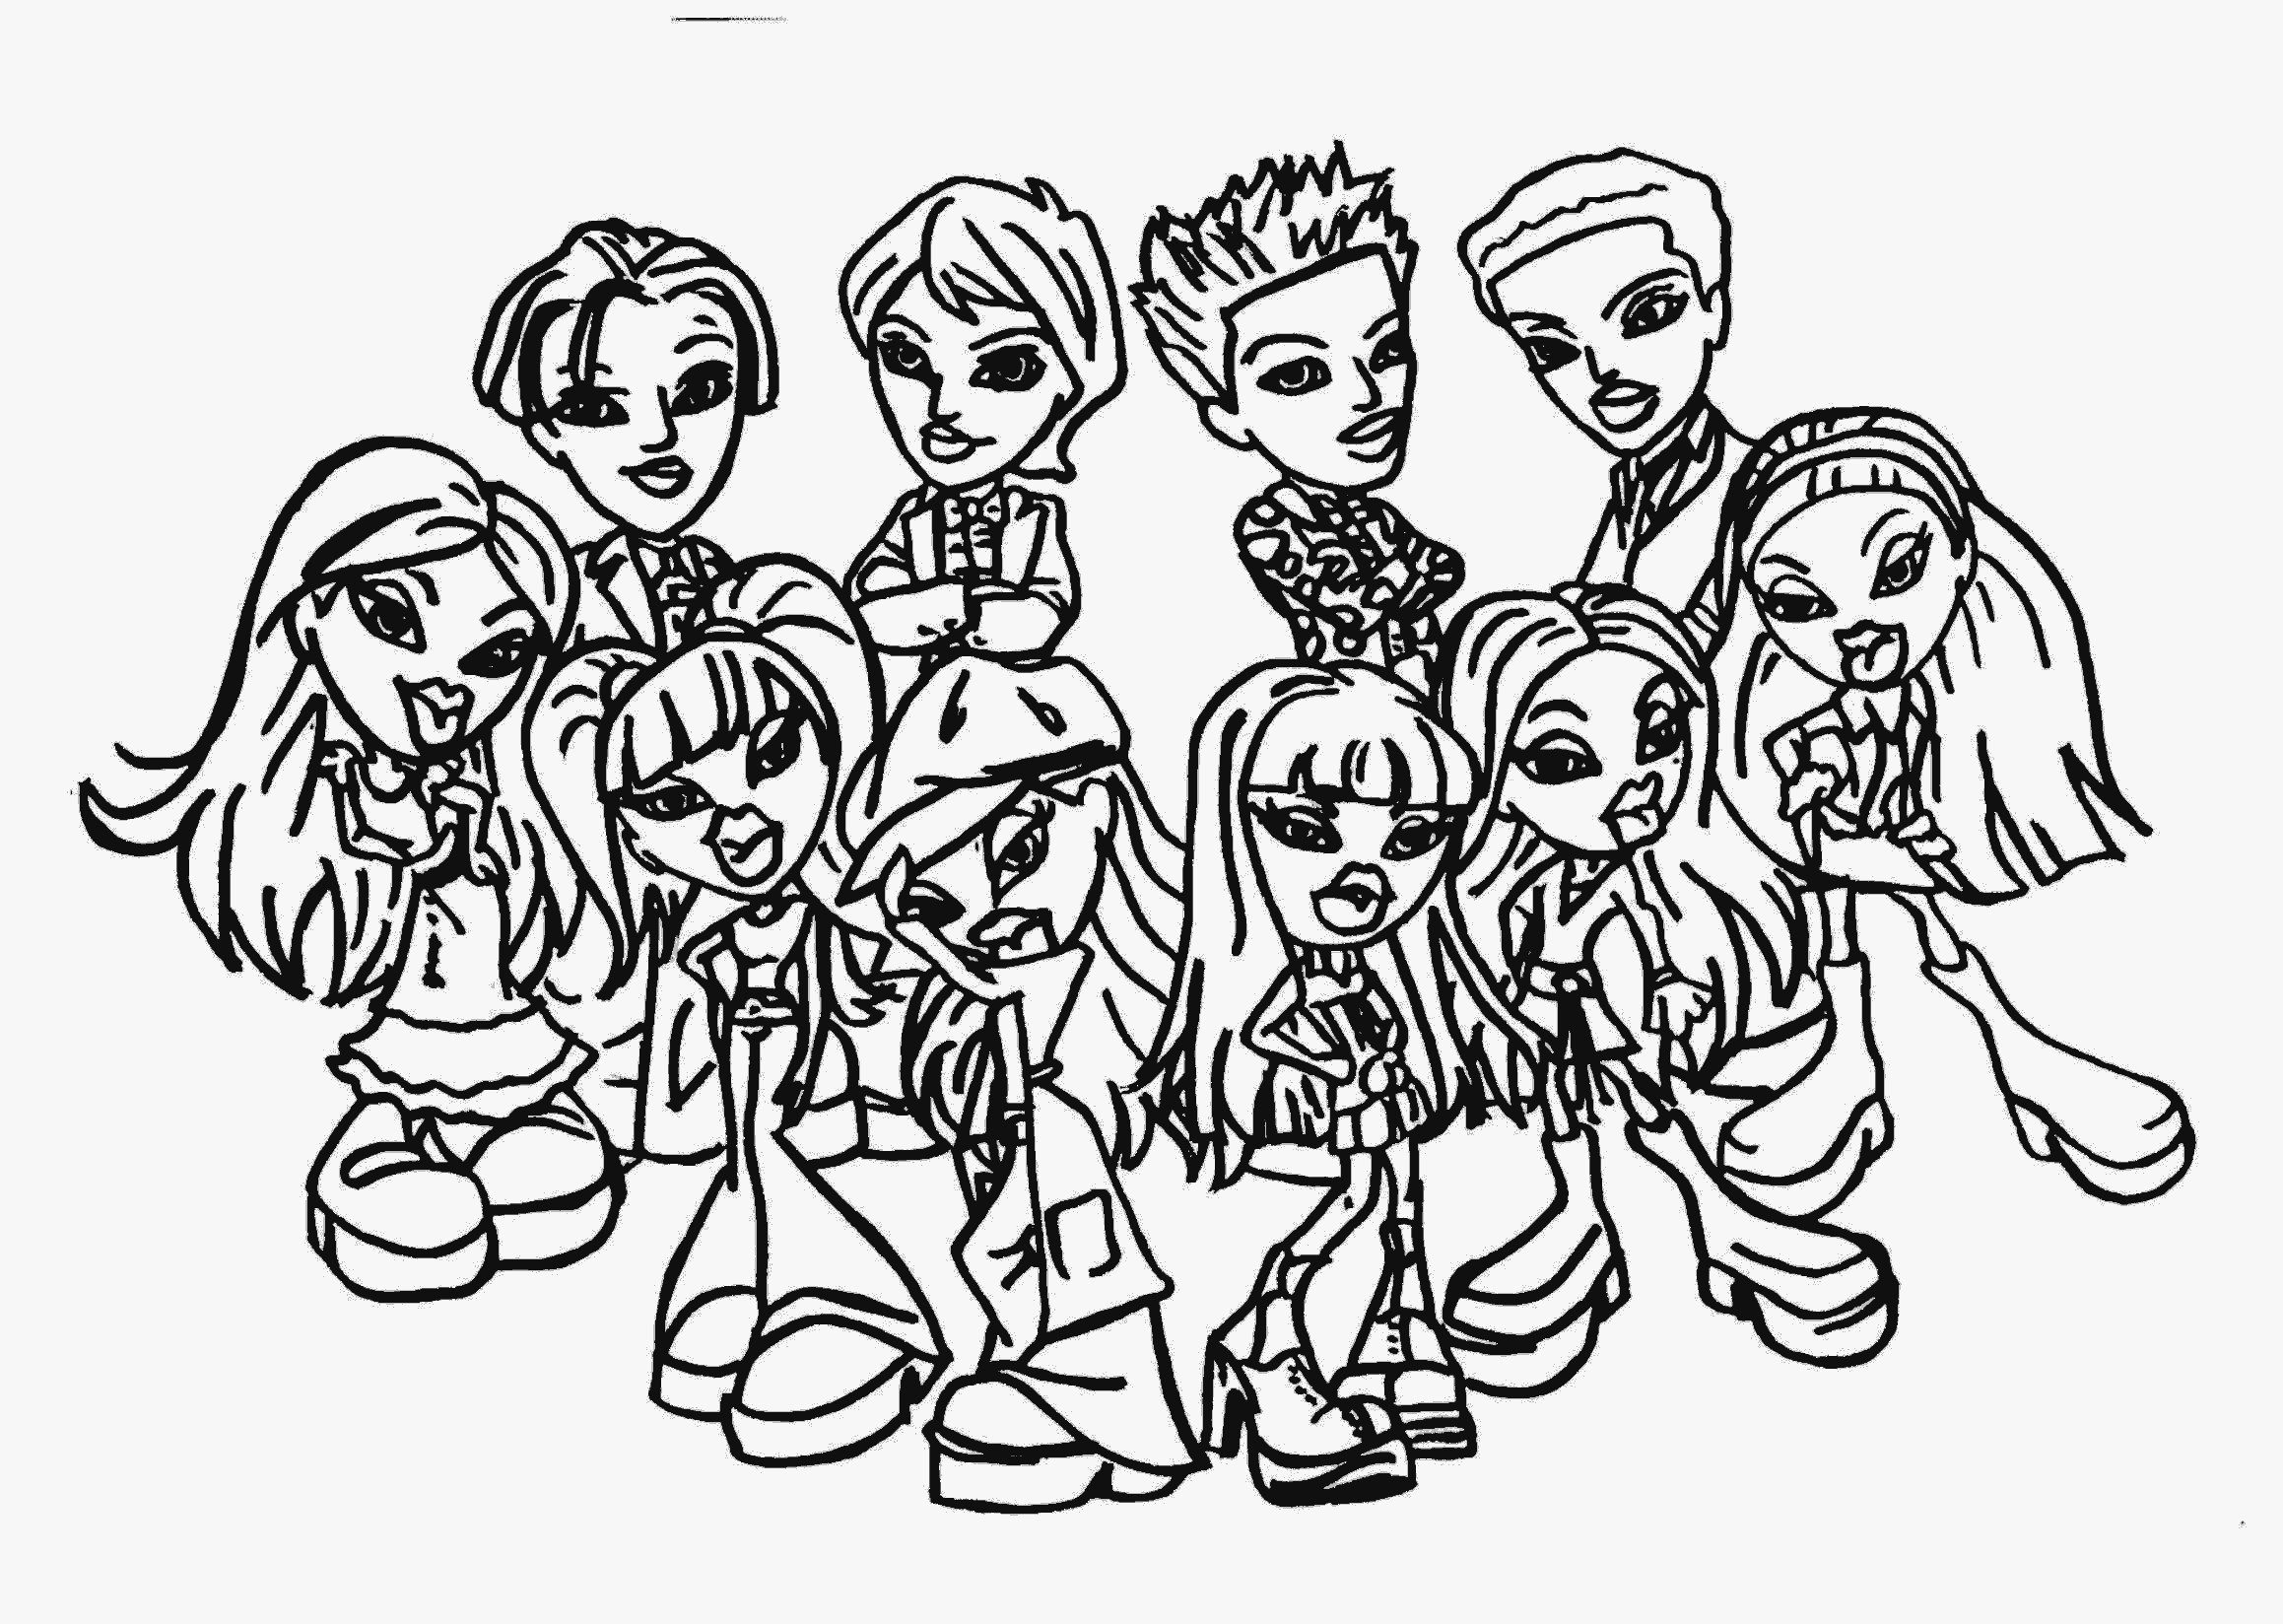 Bratz Babyz Coloring Pages To Print Coloring Home